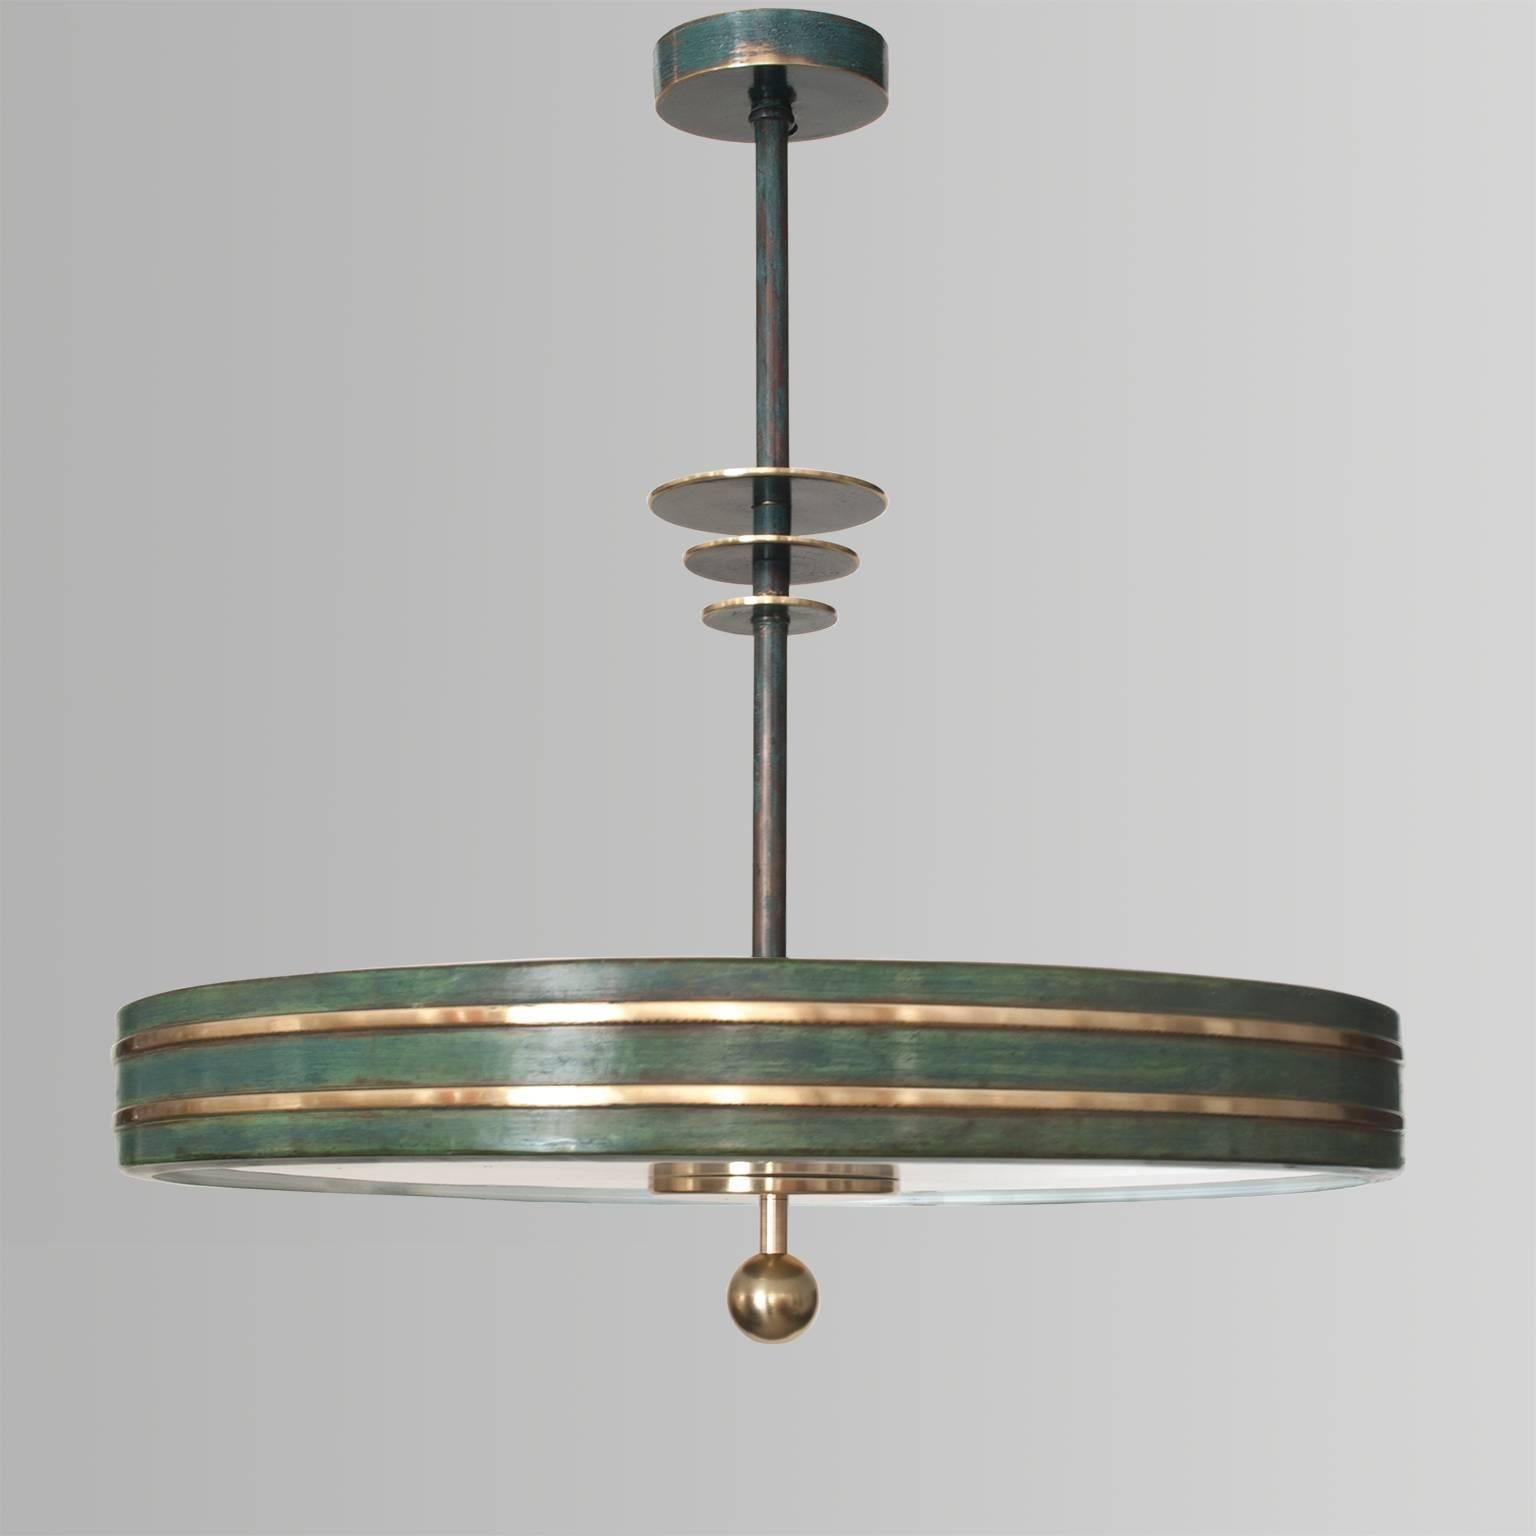 Patinated Scandinavian Modern patinated and polished brass pendant from Bohlmarks